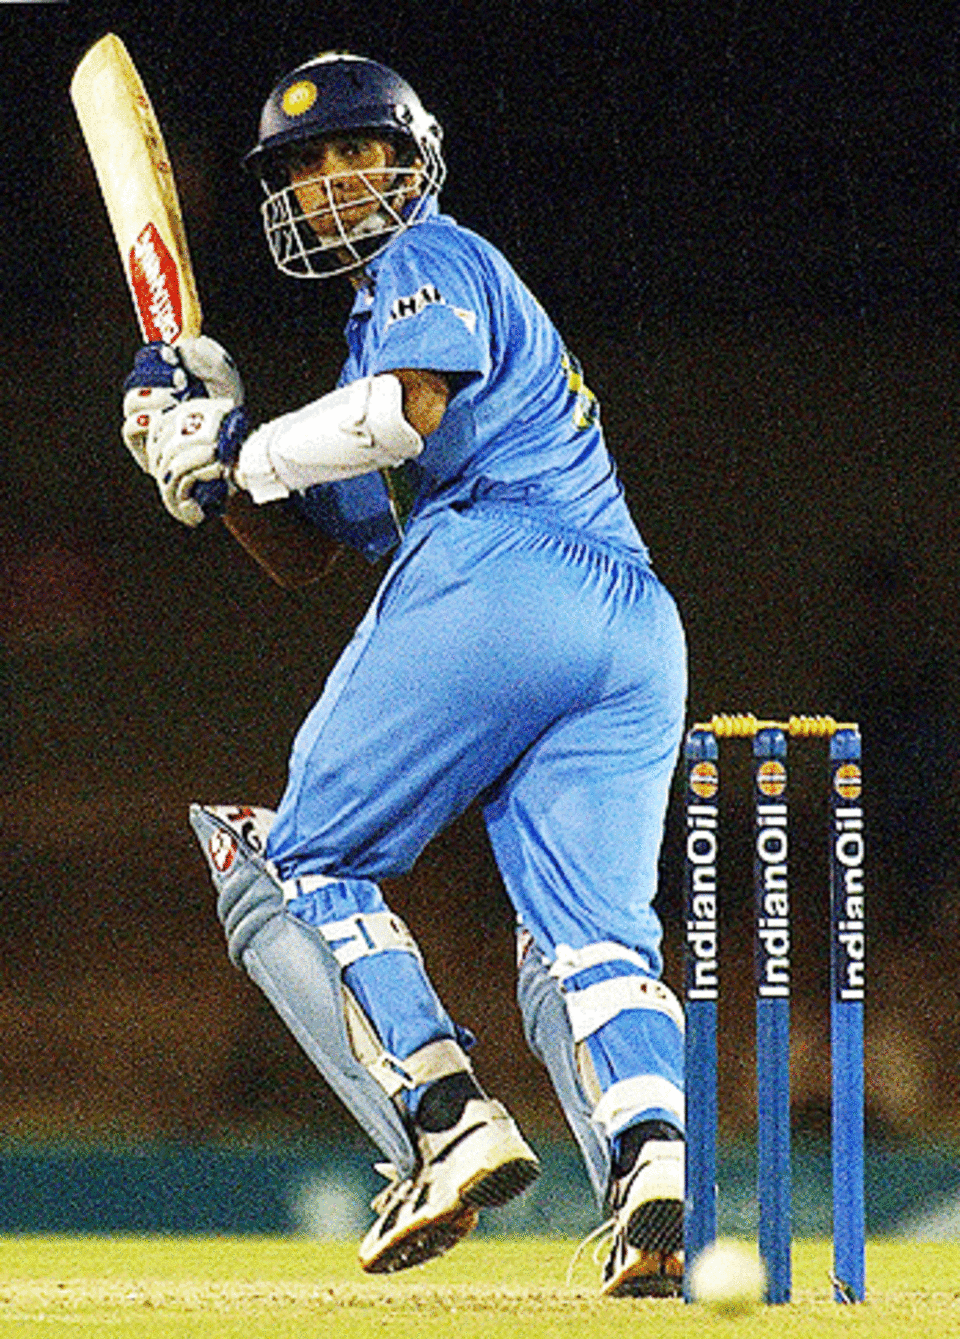 Rahul Dravid plays it fine against the West Indies at the Dambulla Cricket Stadium, July 31, 2005